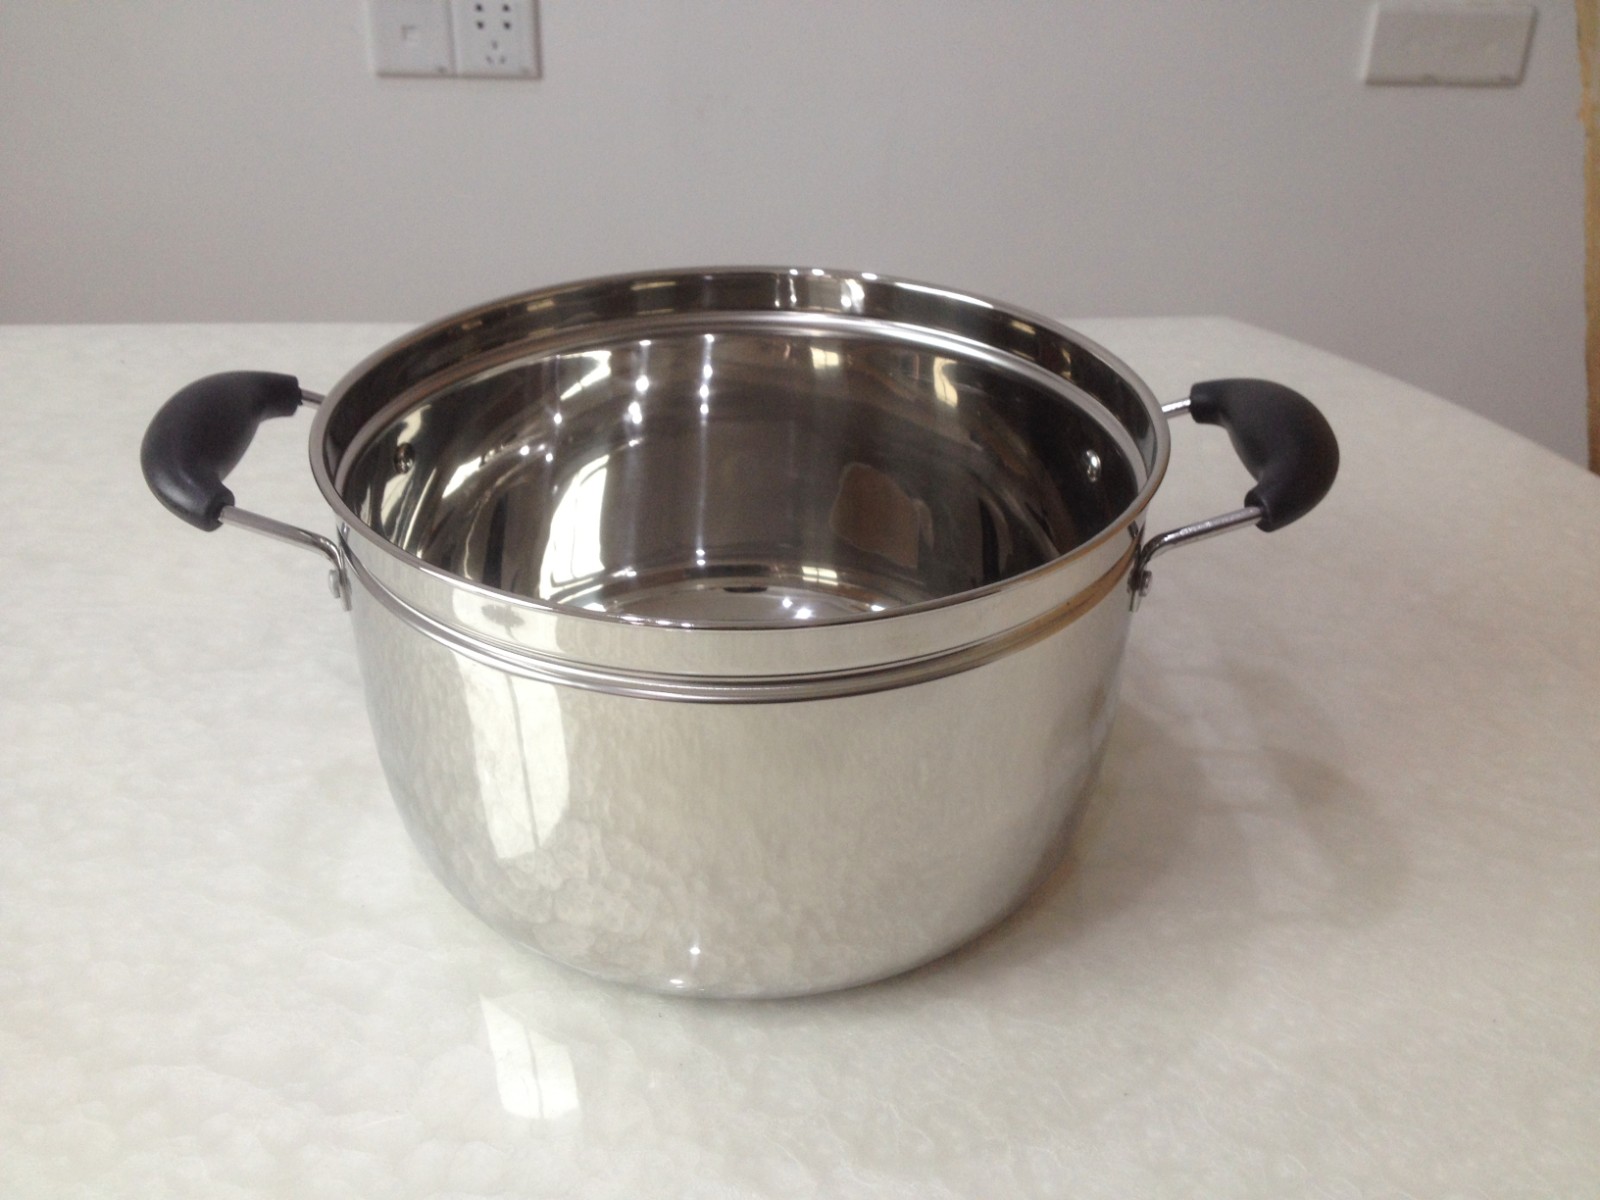 Japanese Style Steamer Stainless Steel Pot Available At Achasoda.com.